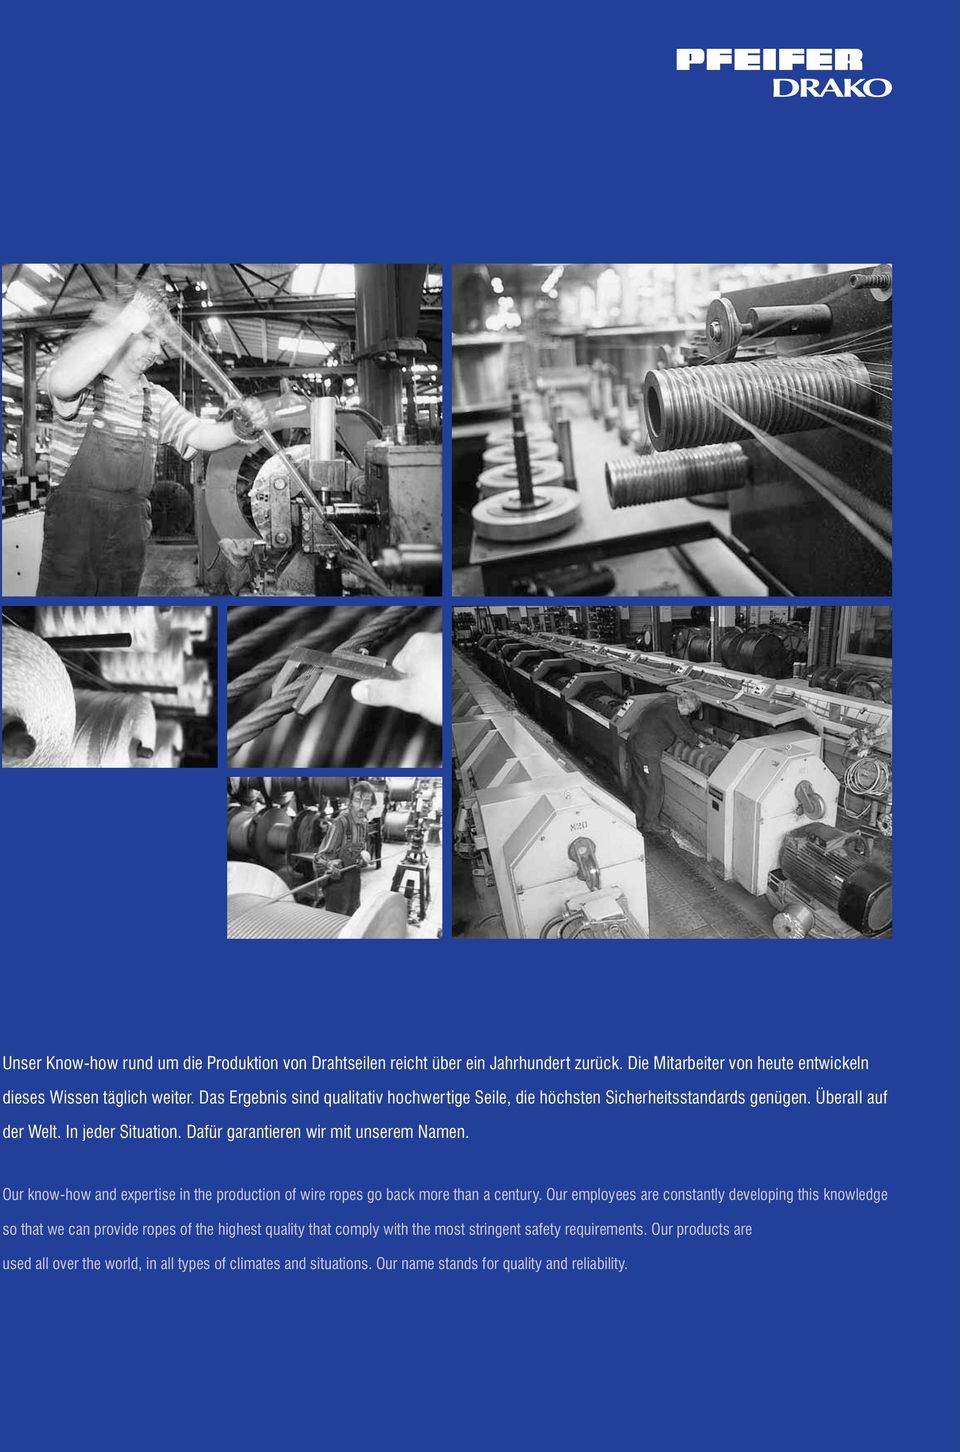 Our know-how and expertise in the production of wire ropes go back more than a century.